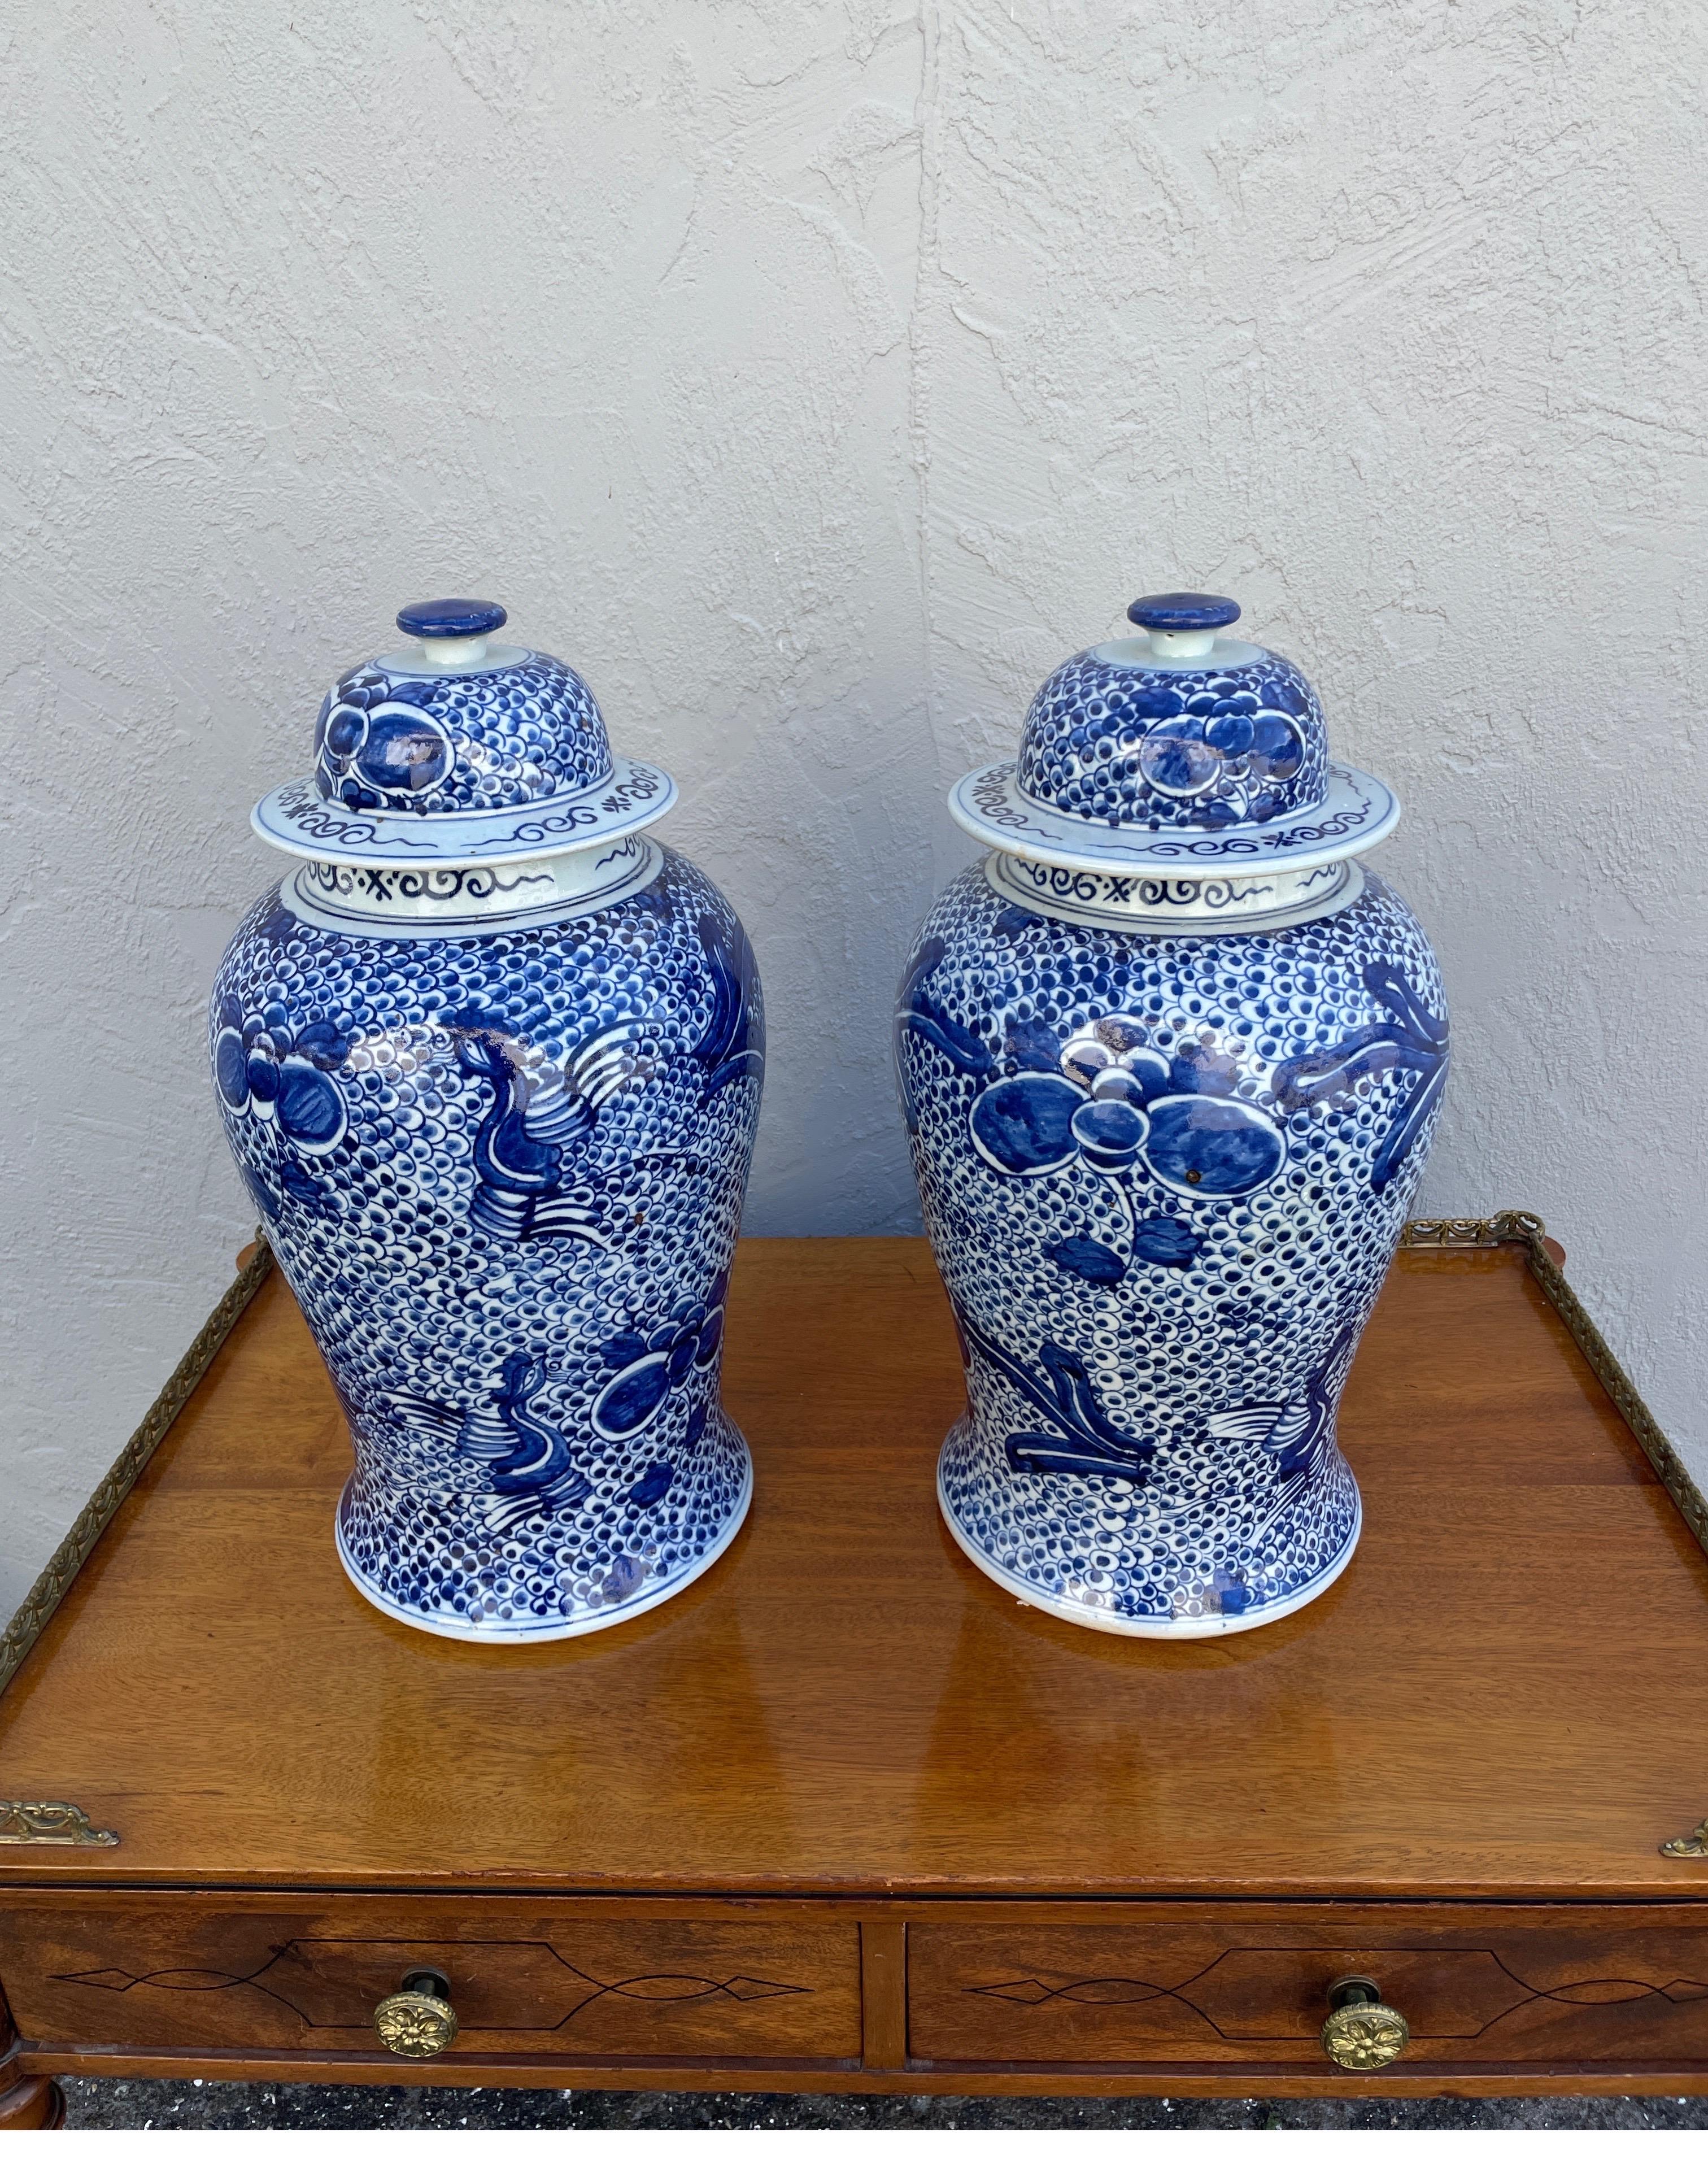 Vintage pair of striking blue and white ginger jars with lids. Vibrant contemporary design.